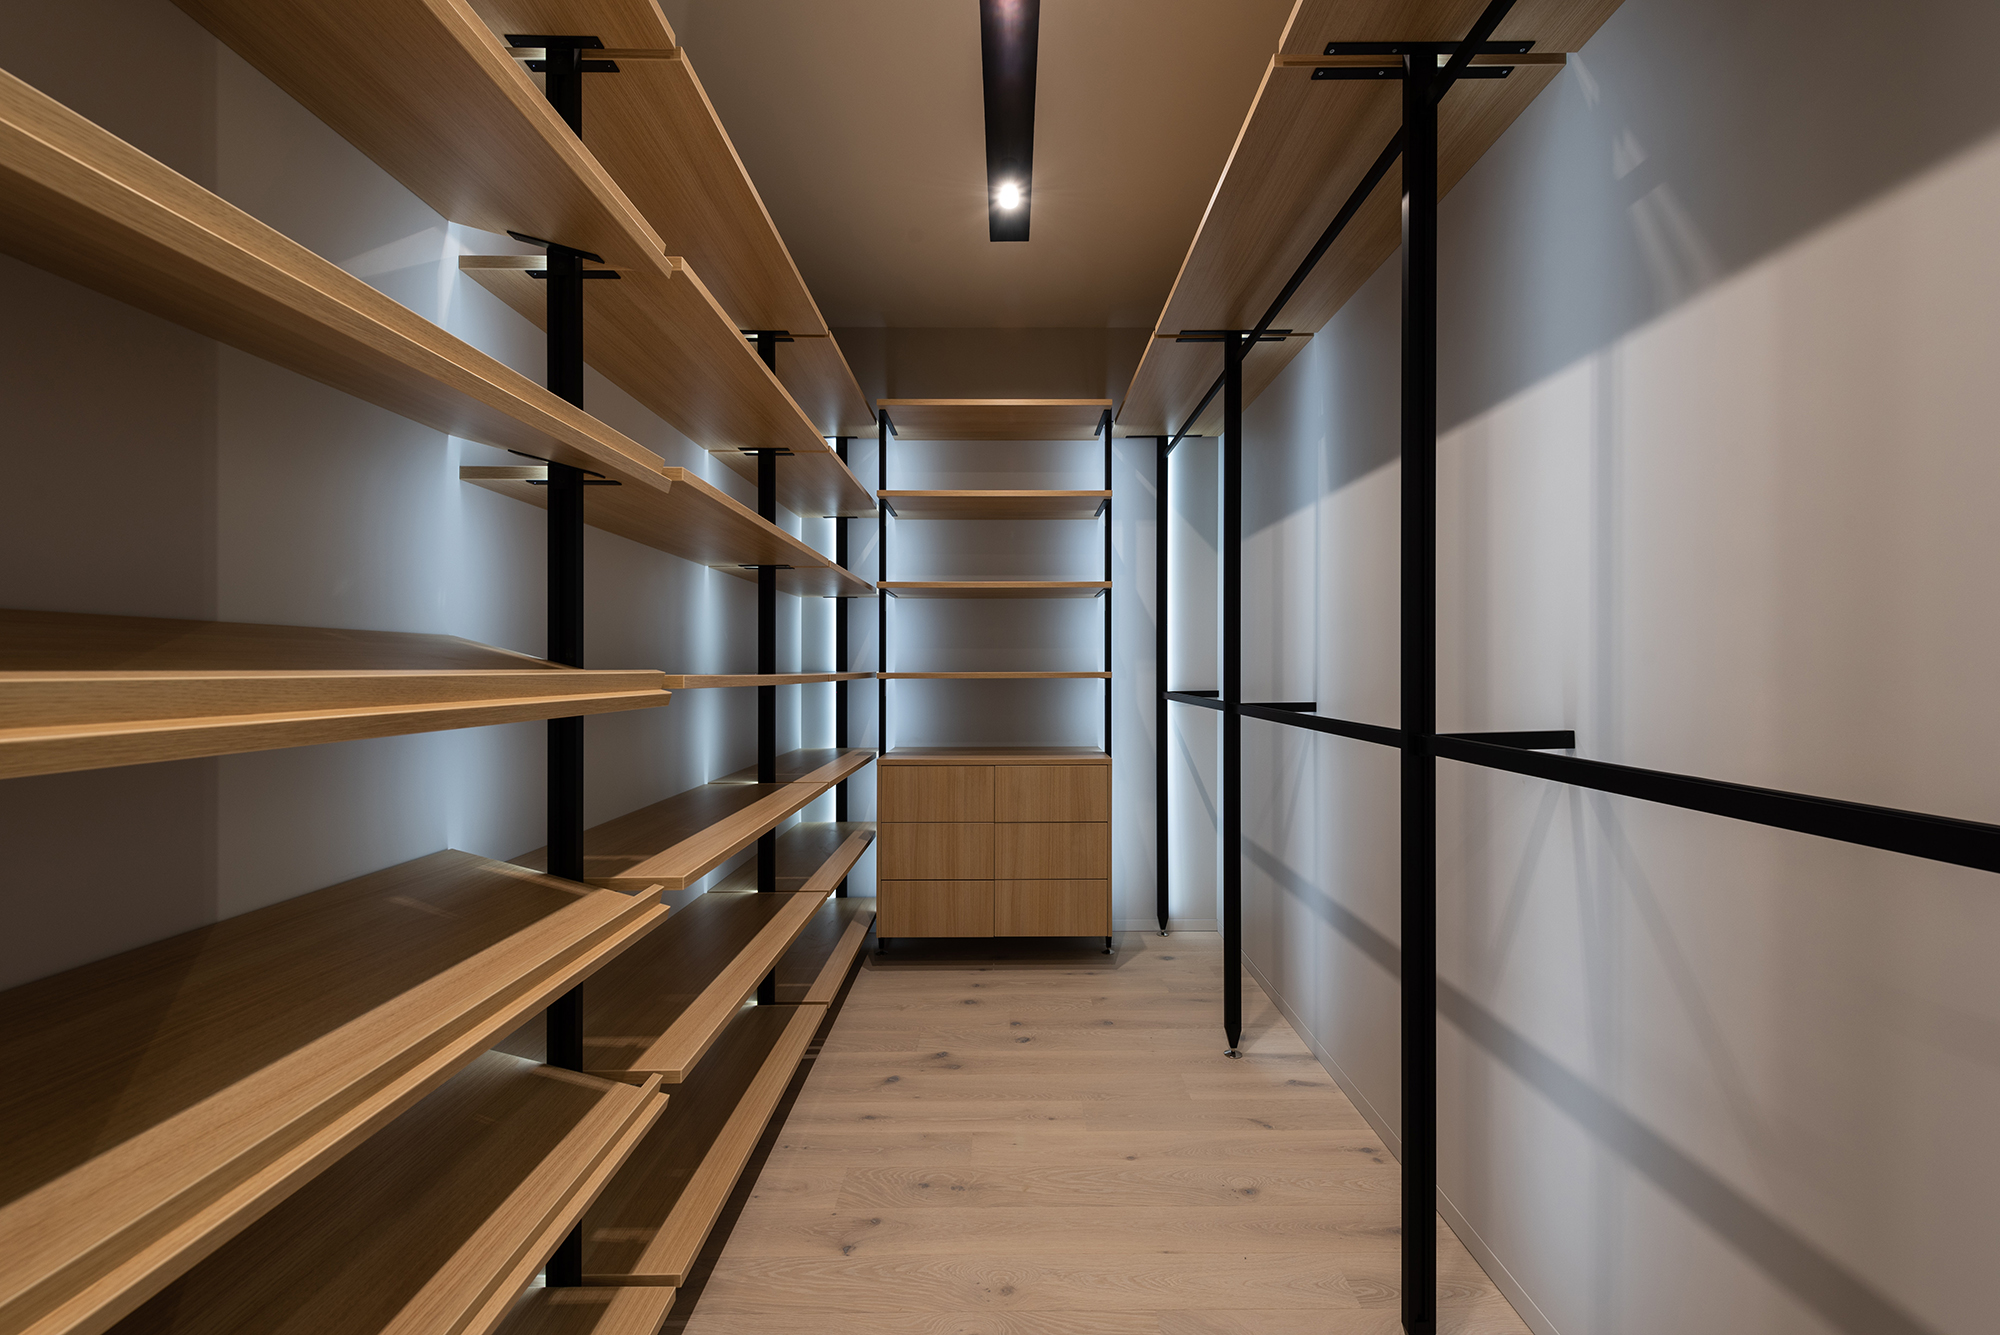 Walk-in closet with open wooden shelving and metal rods.